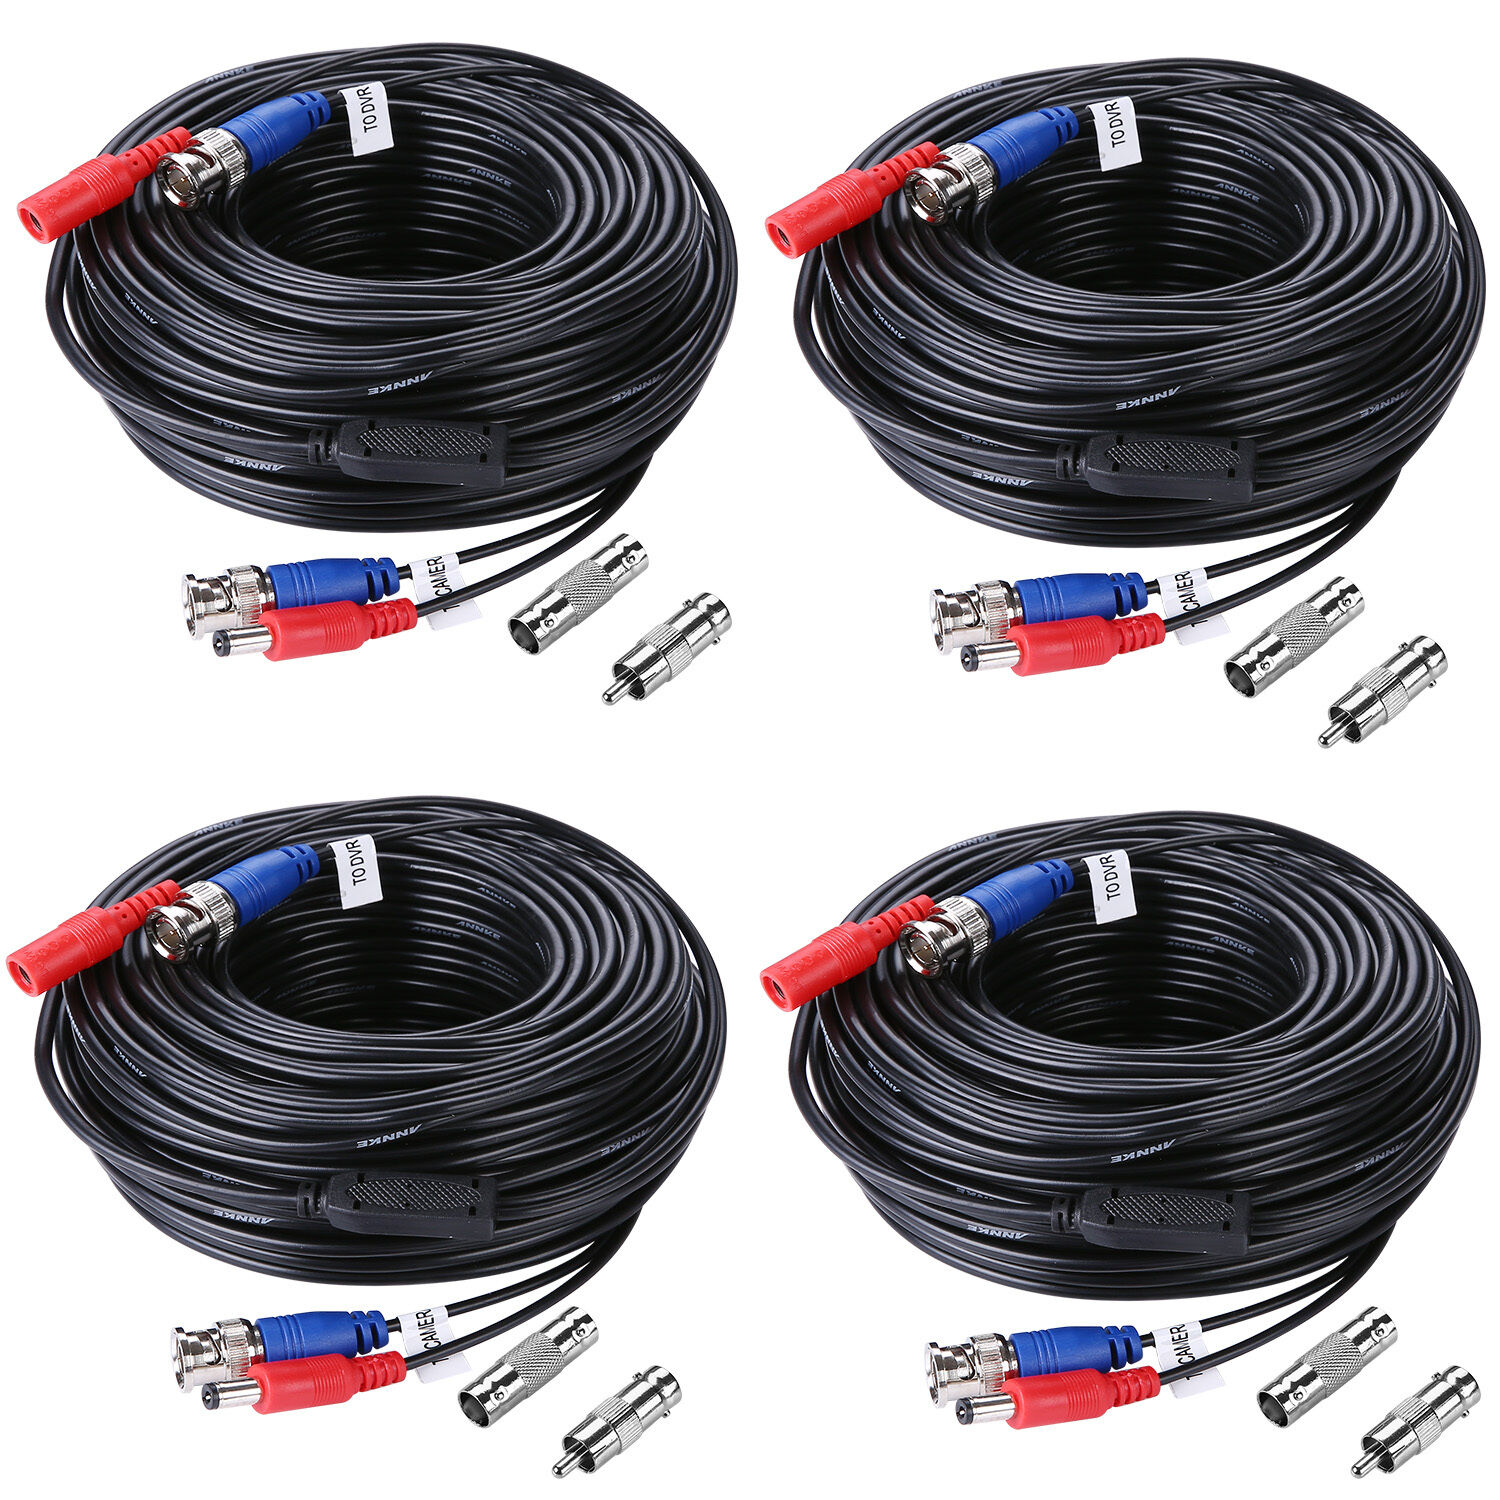 Sannce 4x 100ft 30m Video Power Bnc Extend Cable For Security Camera System